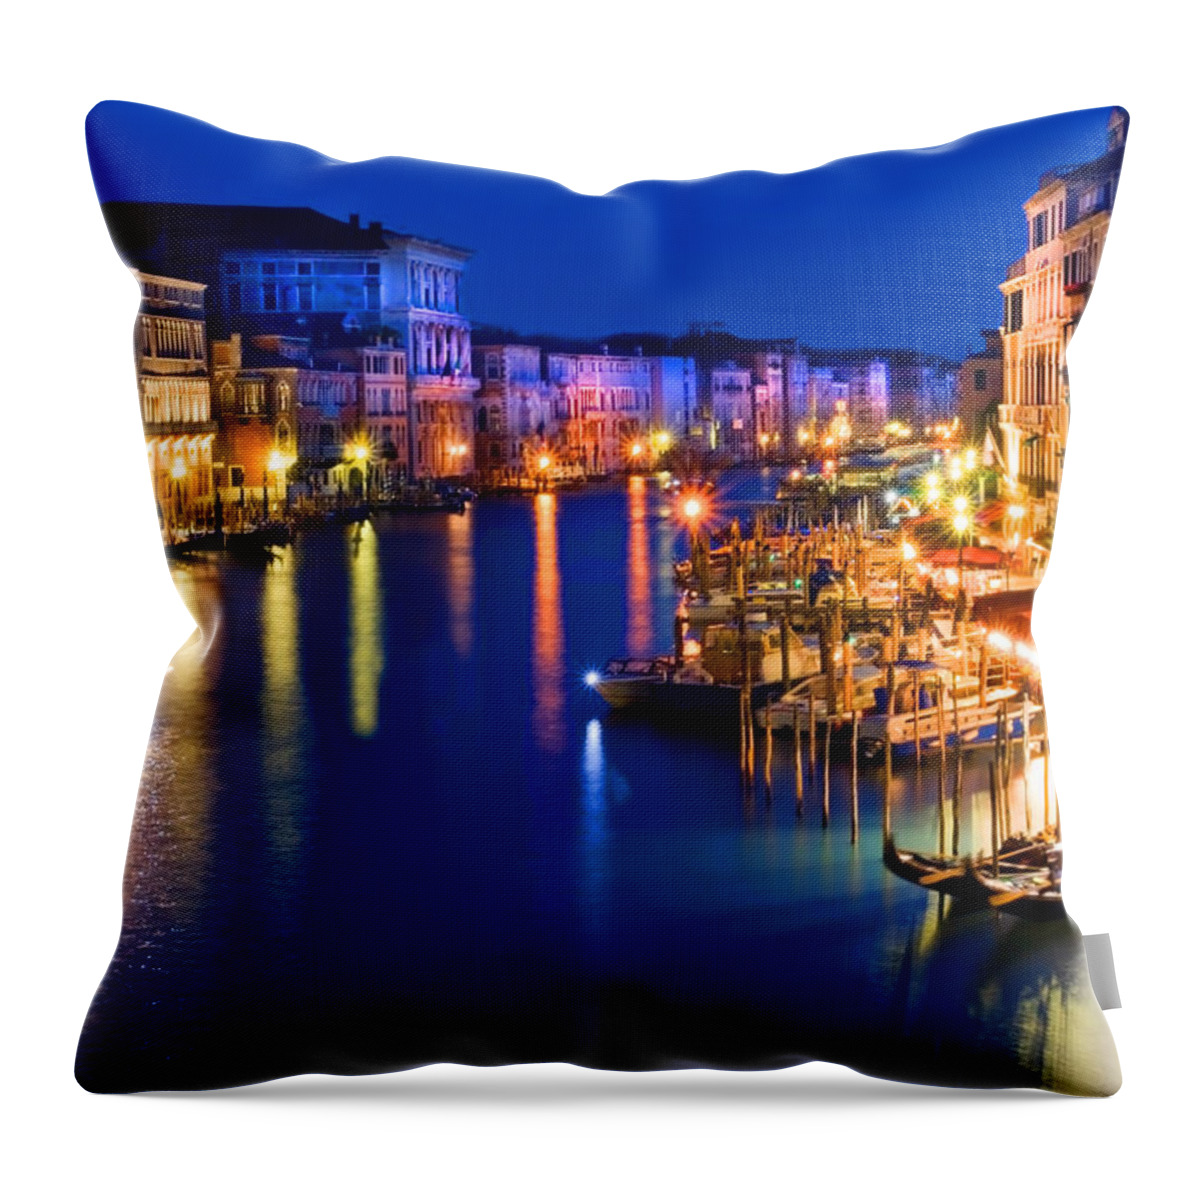 Photography Throw Pillow featuring the photograph View From The Rialto Bridge by Gigi Ebert